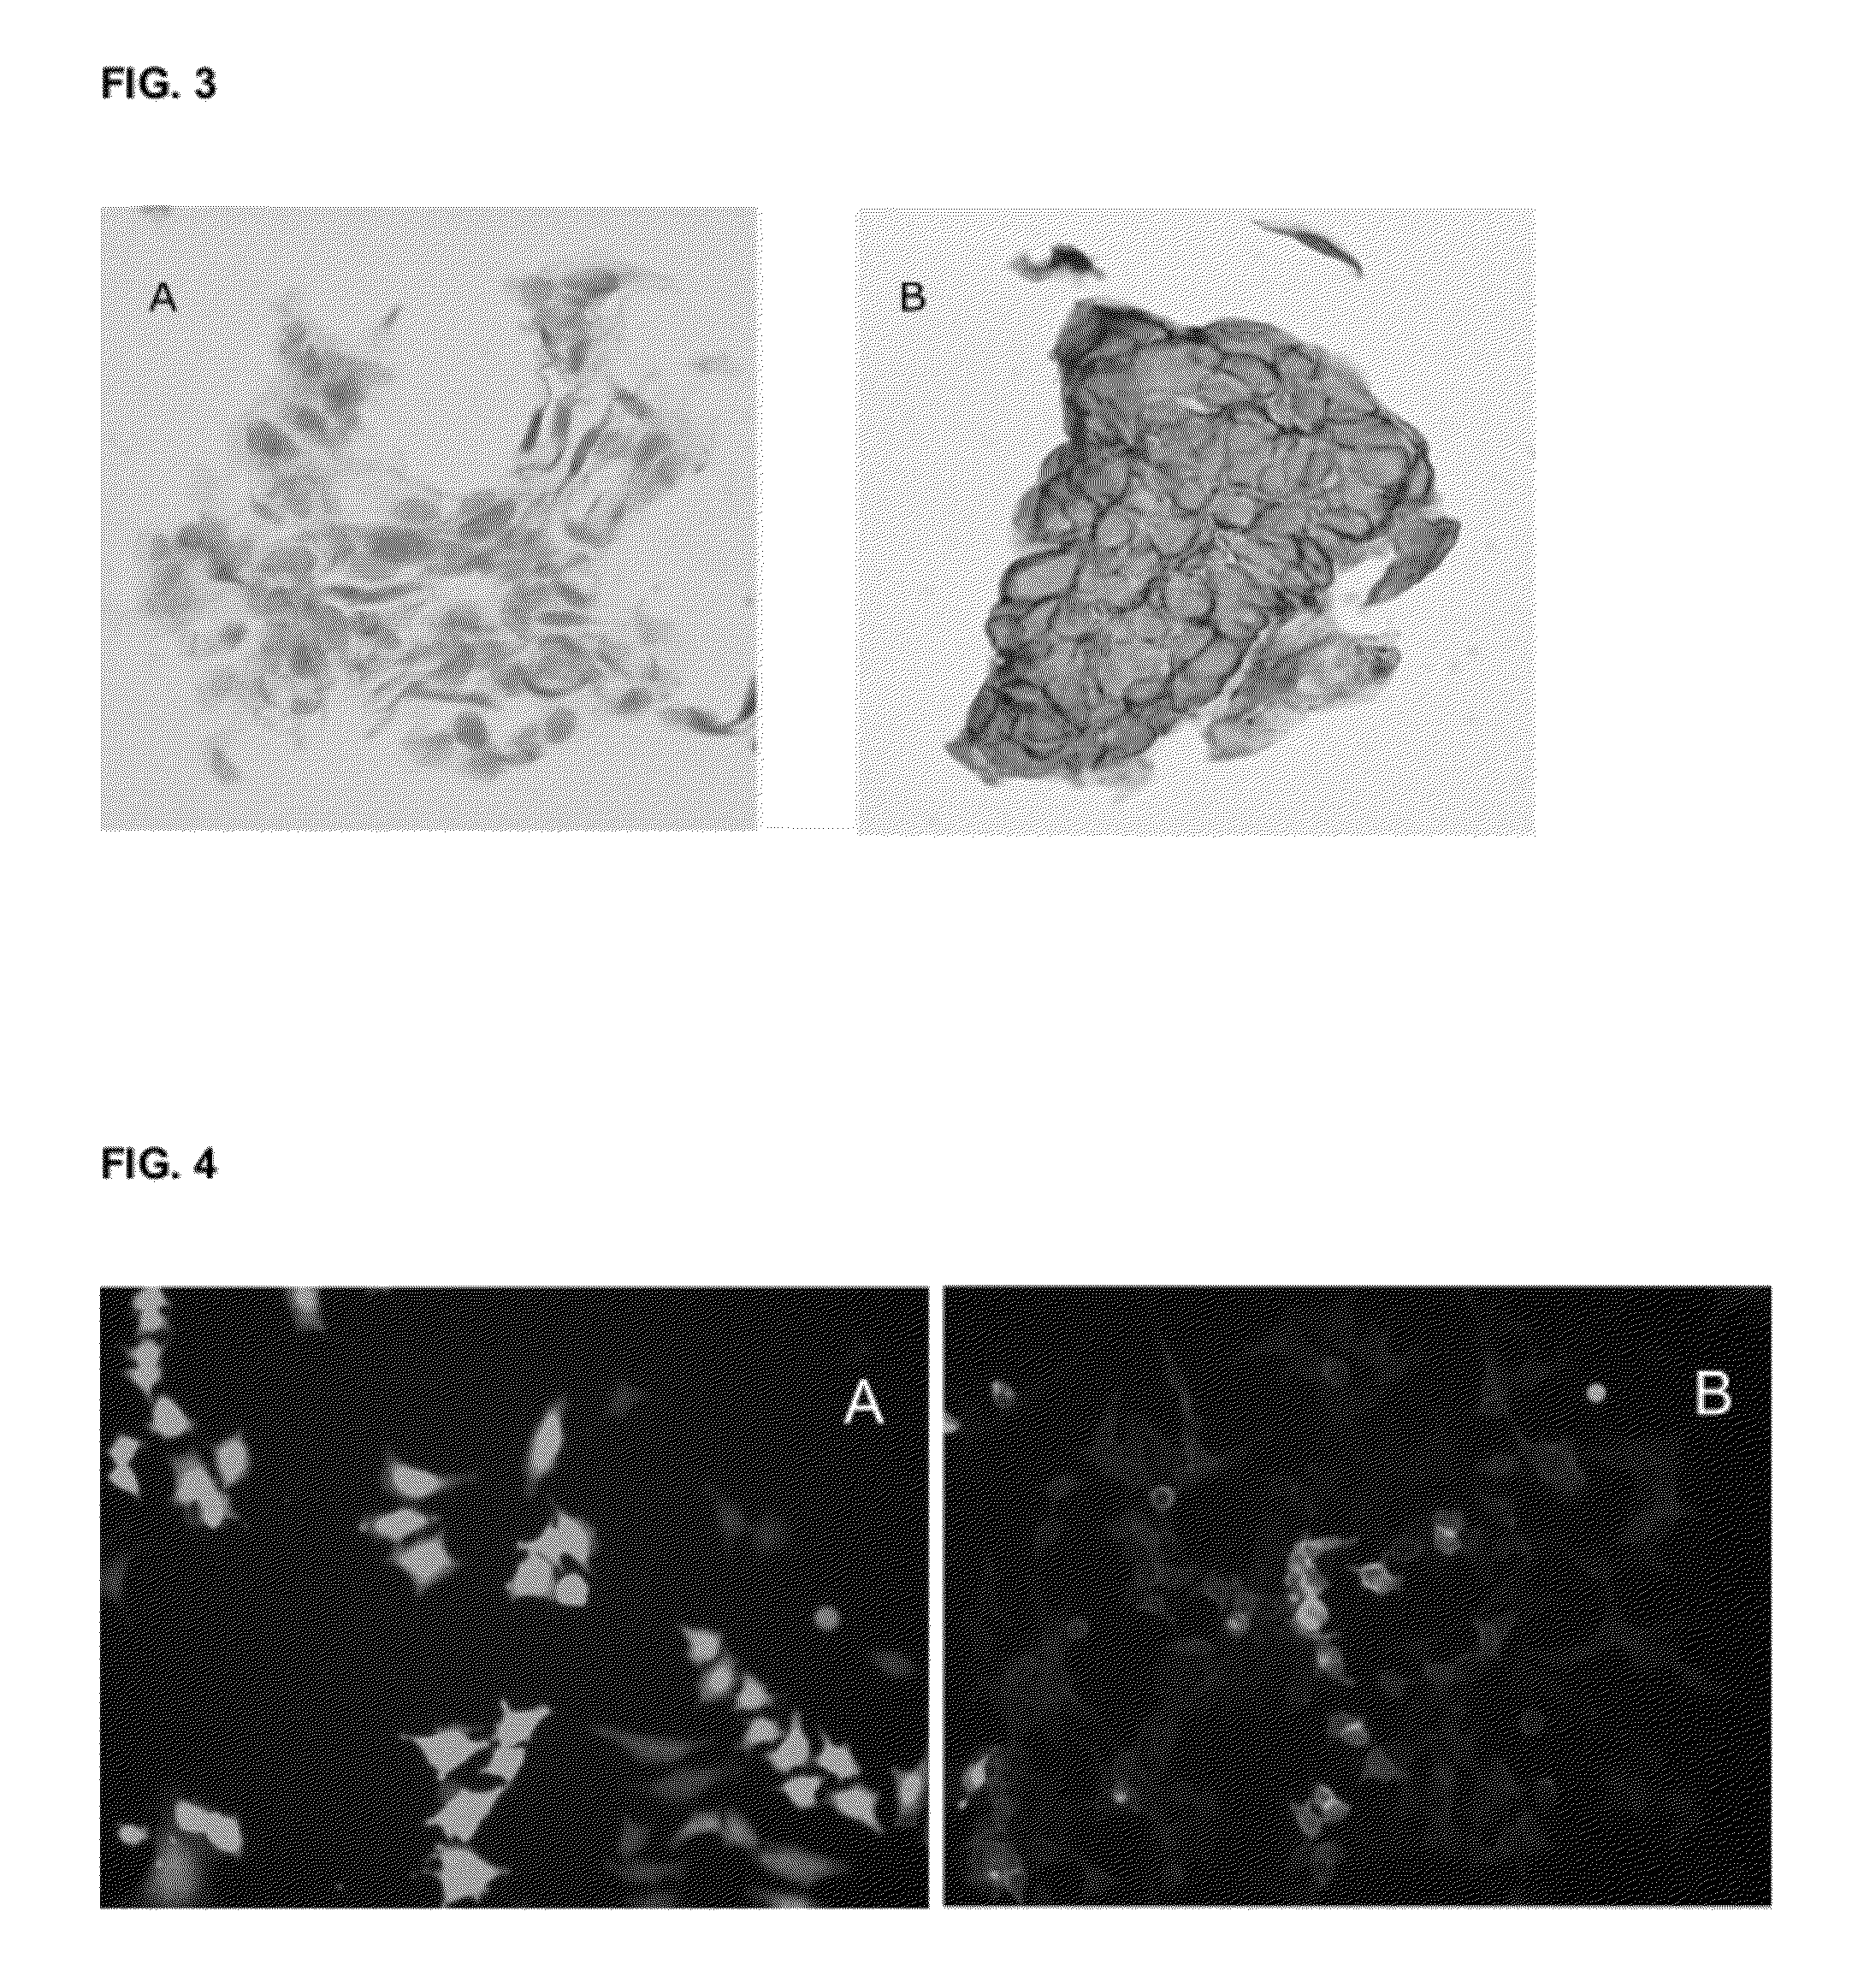 Molecules and methods for modulating tmem16a activities